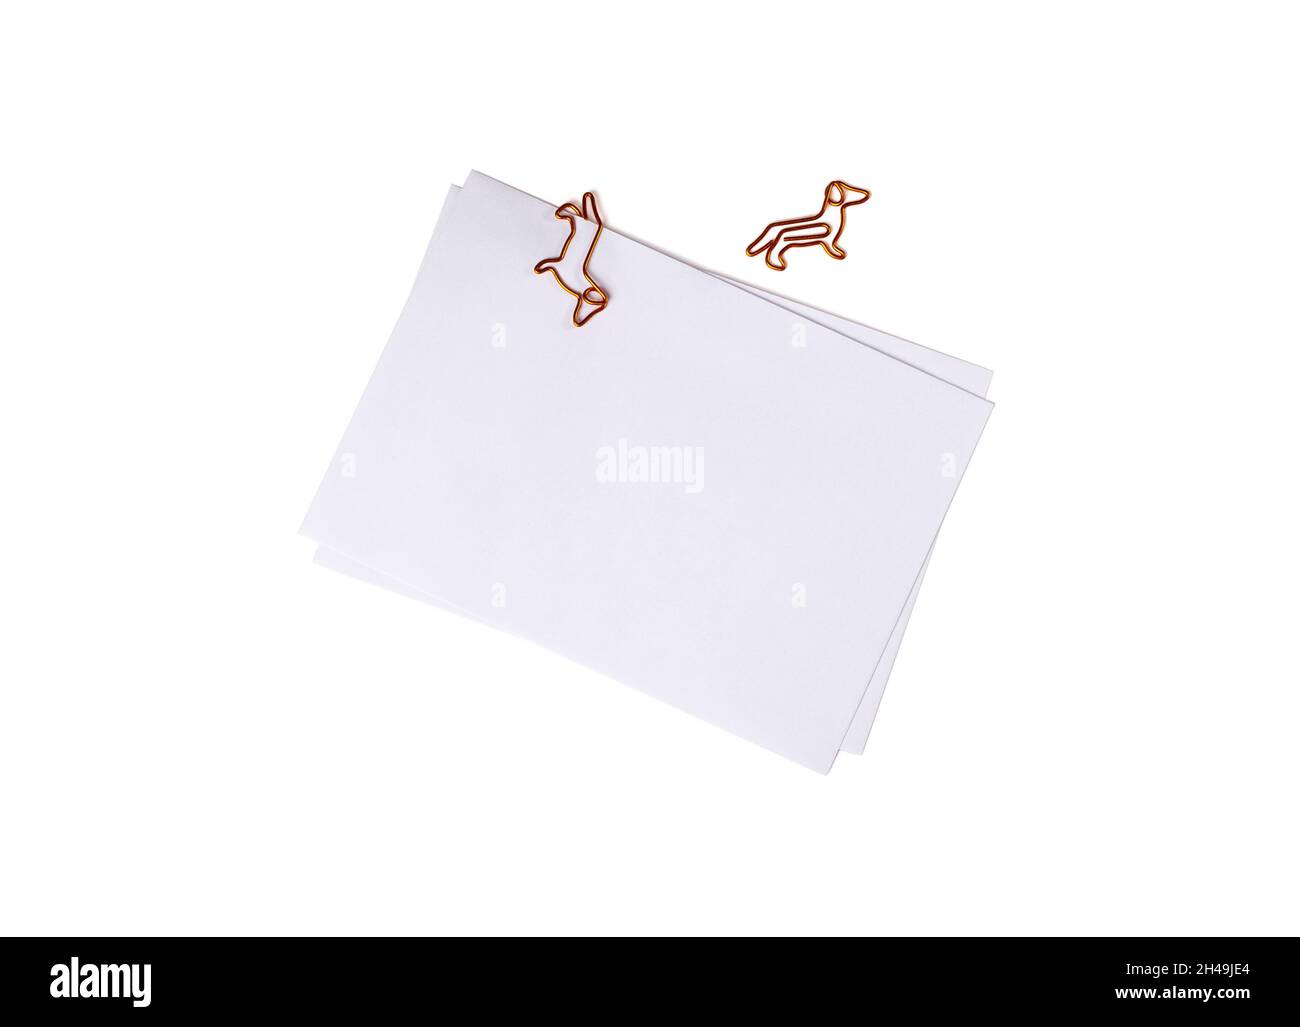 Paper envelope with dog-shaped paper clip on white background. Office supplies for a good mood. reminder on paper. Close up. congratulatory message Stock Photo